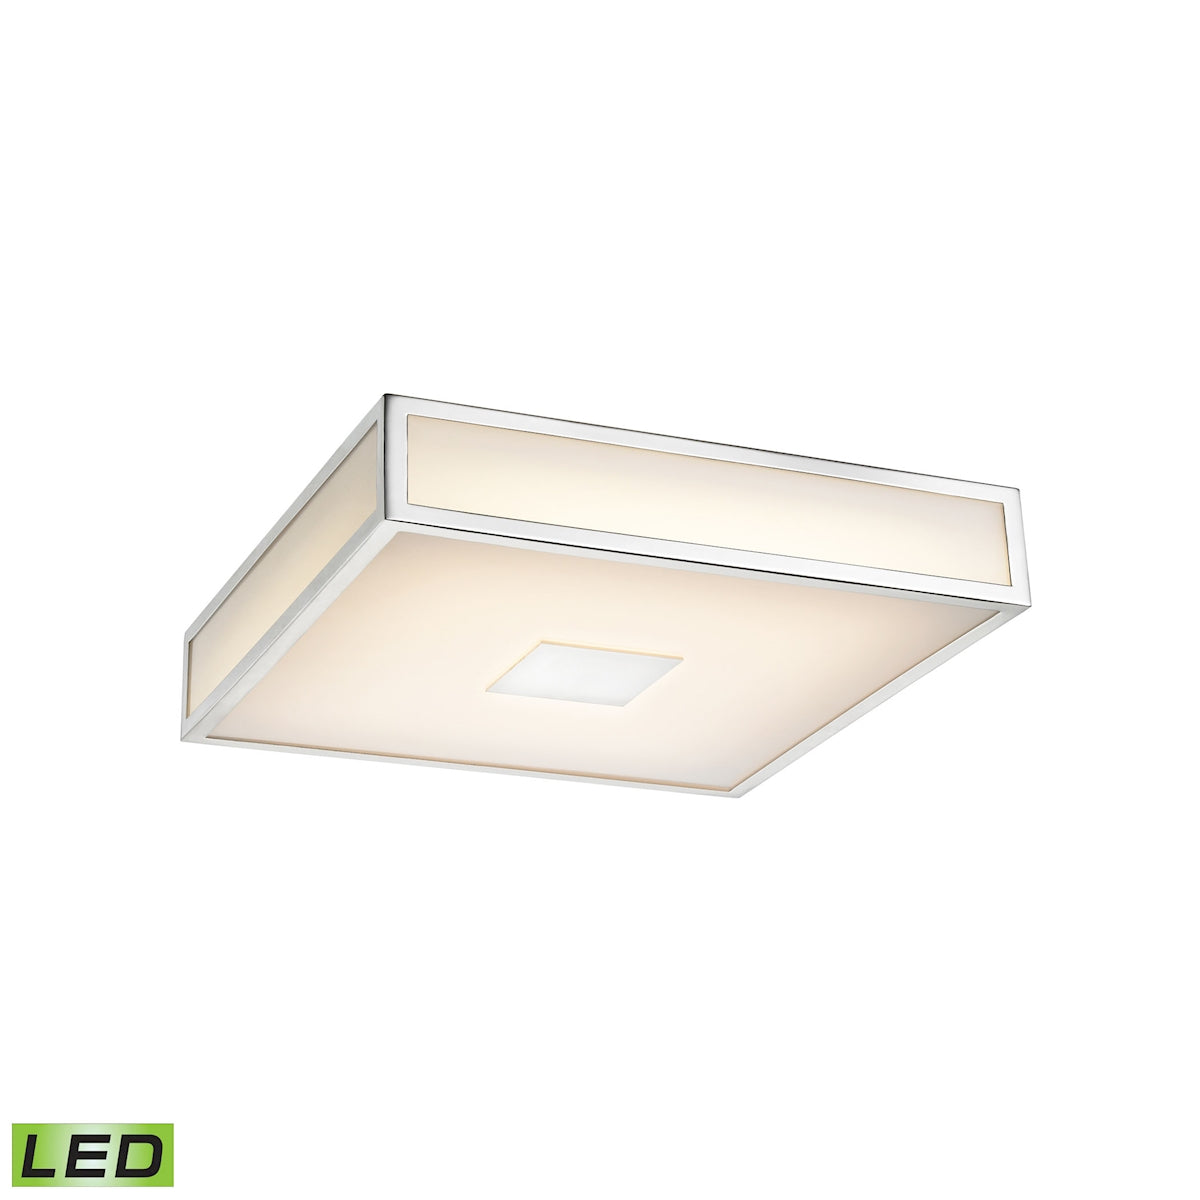 ELK Lighting FML4100-10-15 Hampstead 1-Light Flush Mount in Chrome with Opal White Acrylic Diffuser - Integrated LED